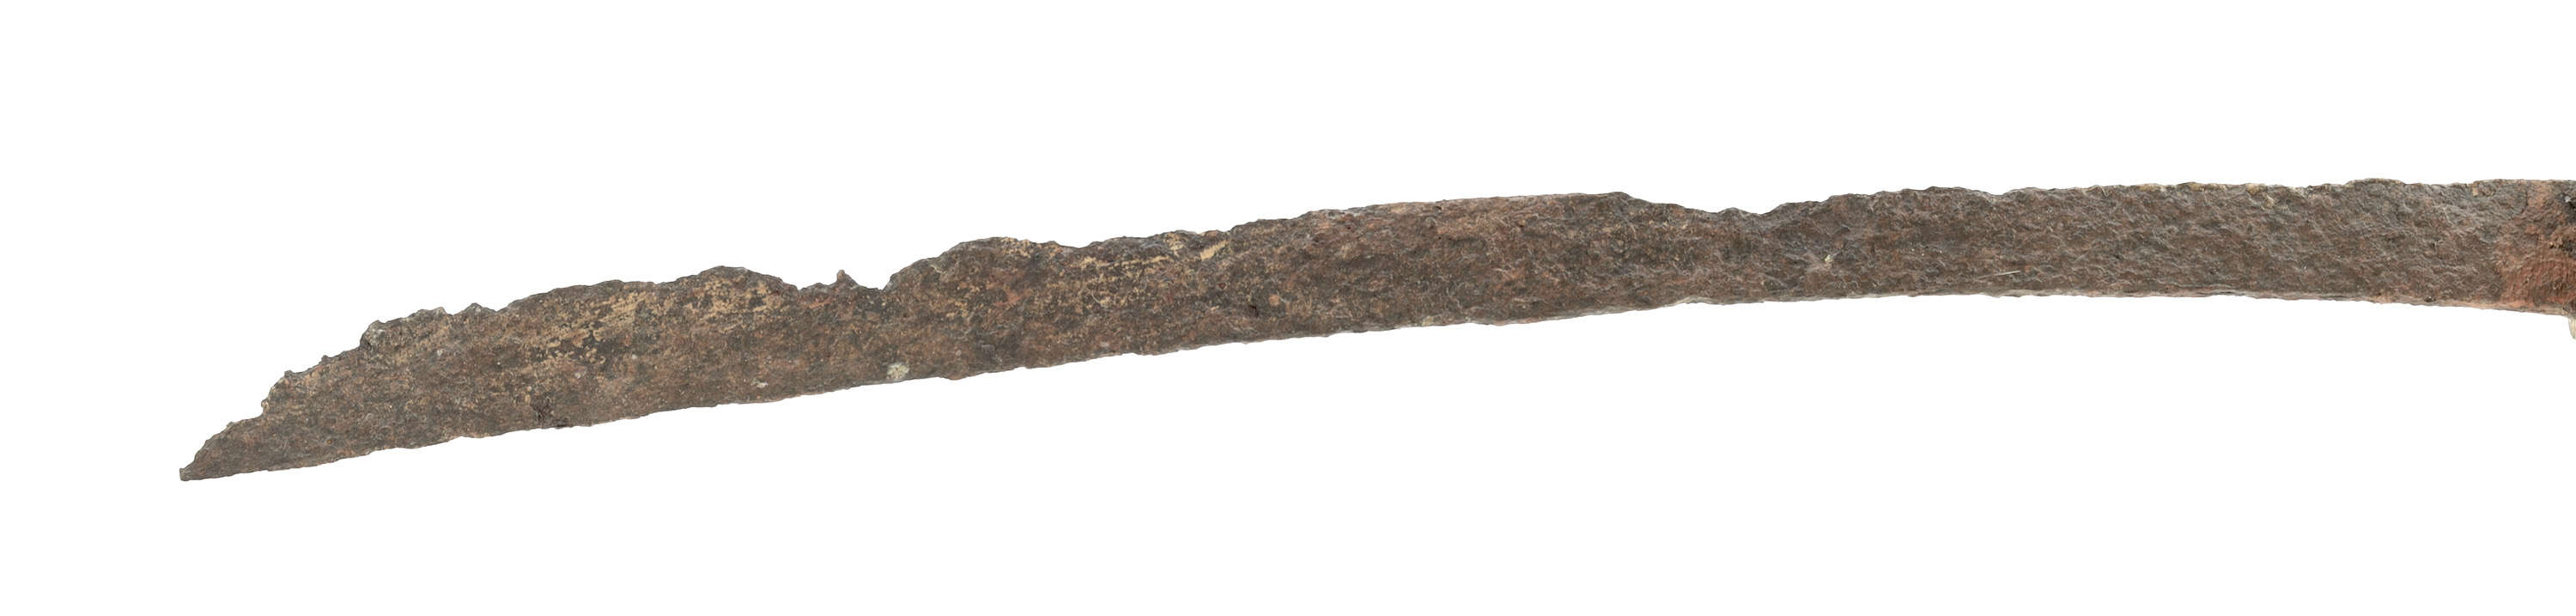 Old excavated southeast asian dha sword